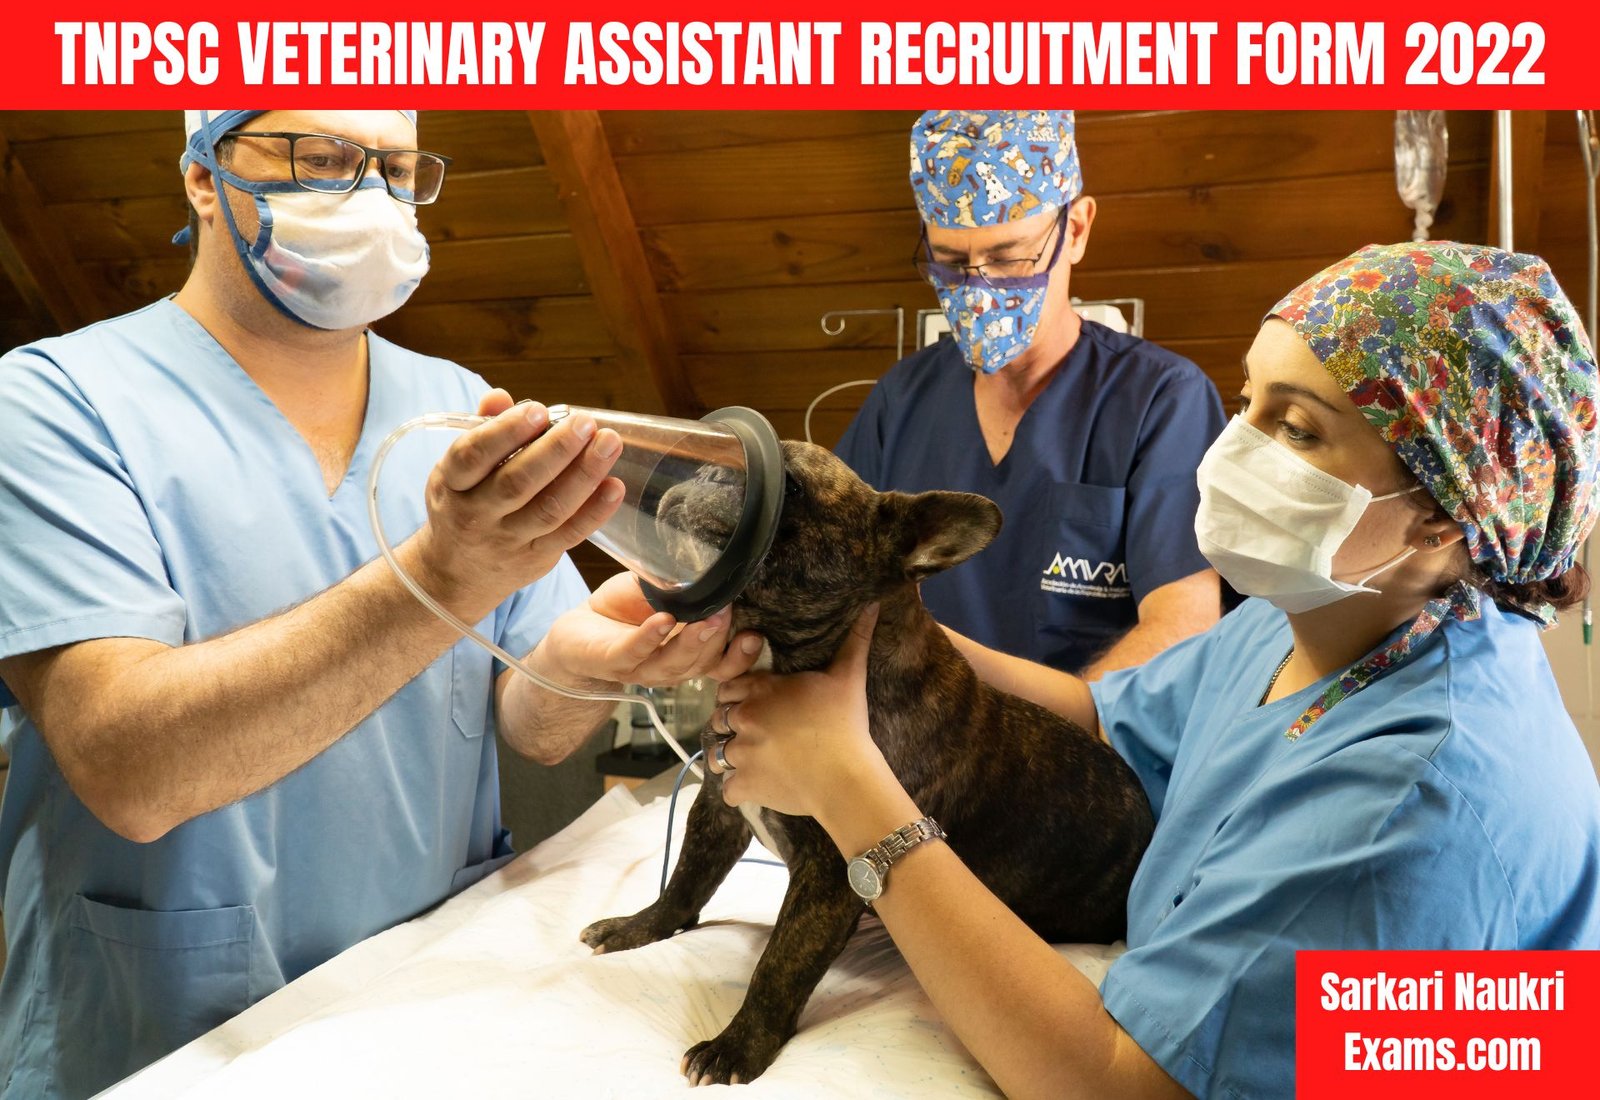 TNPSC Veterinary Assistant Recruitment Form 2022 | Salary Up To 205700/-